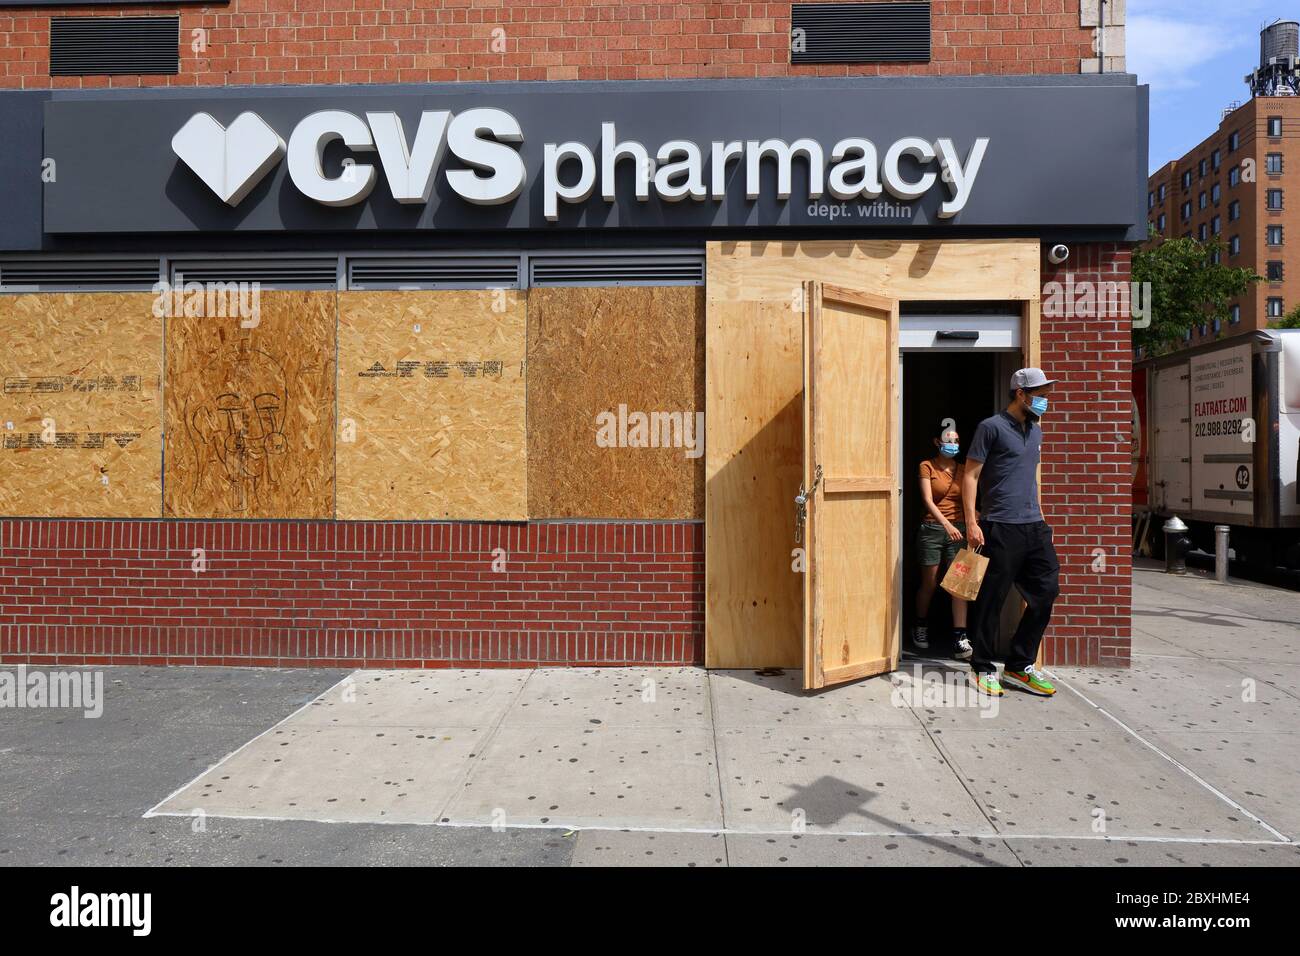 New York, NY. 4th June 2020. Shoppers exiting a CVS pharmacy with boarded up windows after a recent spate of large scale, organized burglaries/looting elsewhere in the city. The store joins other businesses across the city fearful of vandalism by boarding up their windows and doors as a precautionary measure while staying open for business during the covid 19 pandemic. The many shuttered storefronts across the city sends a message of hopelessness and despair to many not used to seeing so many shuttered storefronts in a normally vibrant and busy City. June 4, 2020 Stock Photo